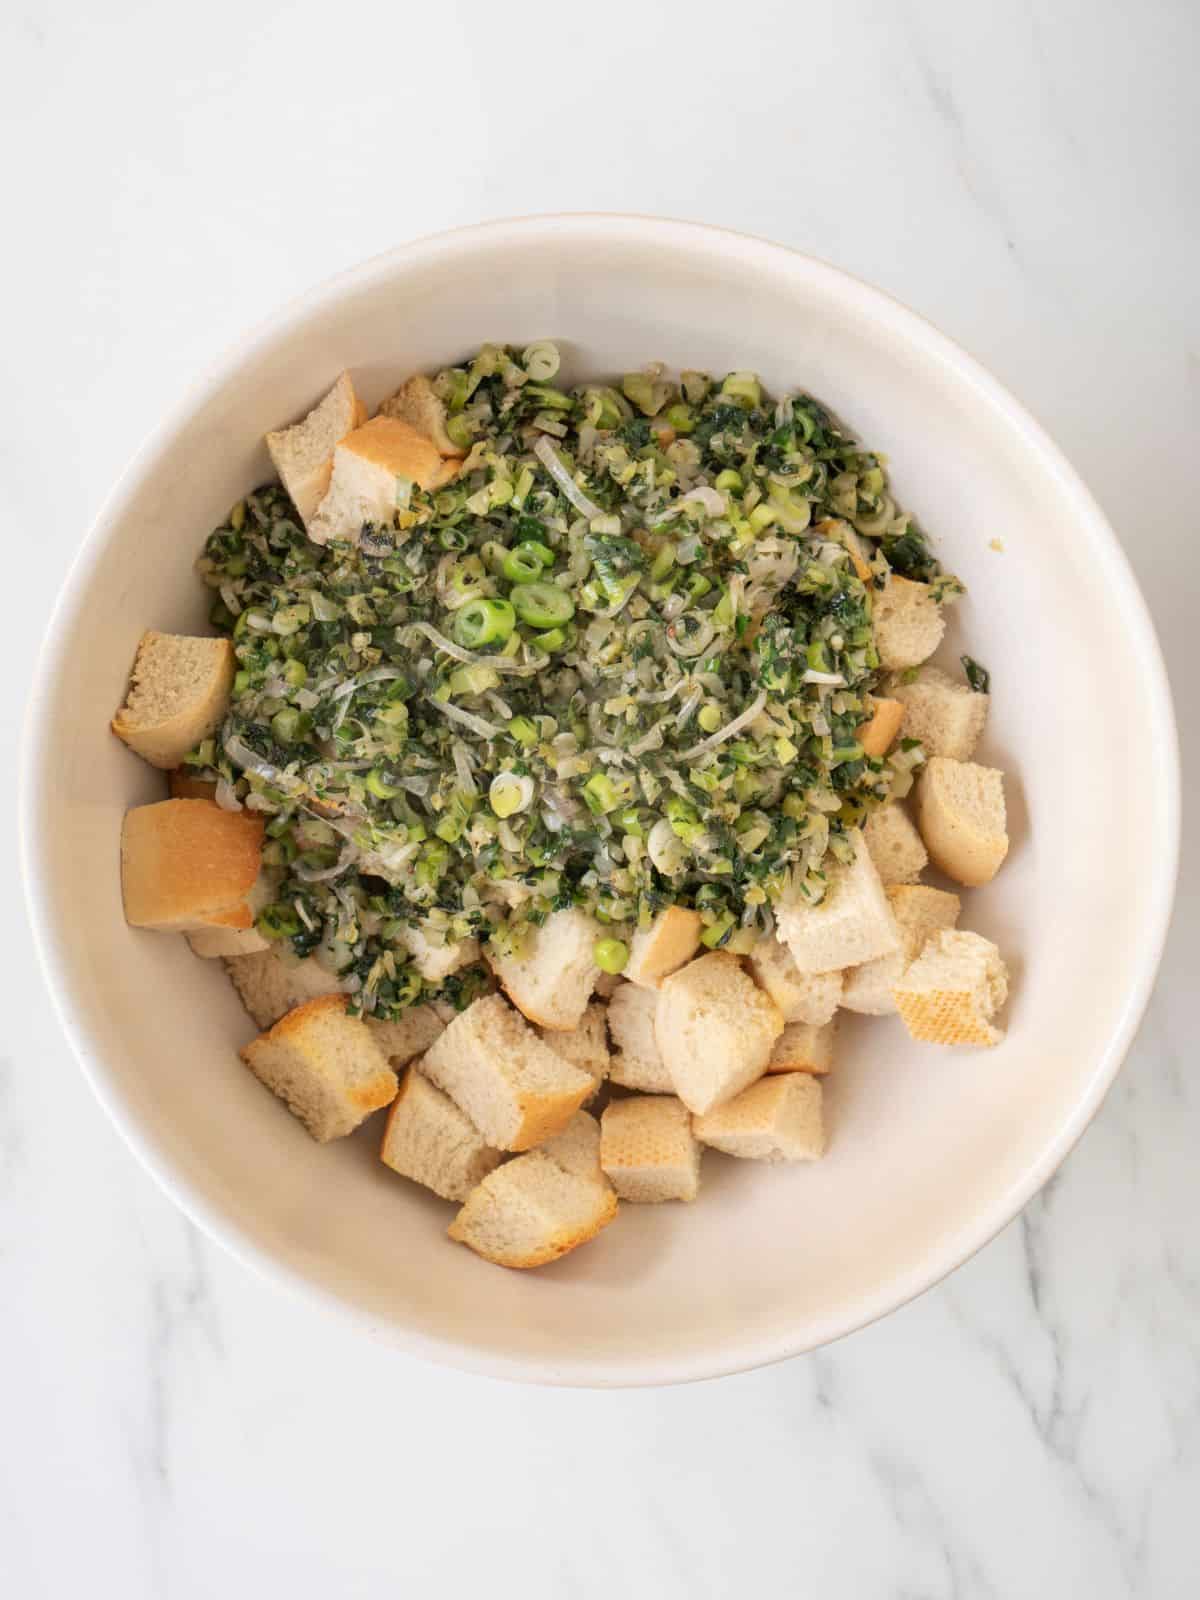 A white mixing bowl with cubed bread, and the cooked herb and vegetable mixture.